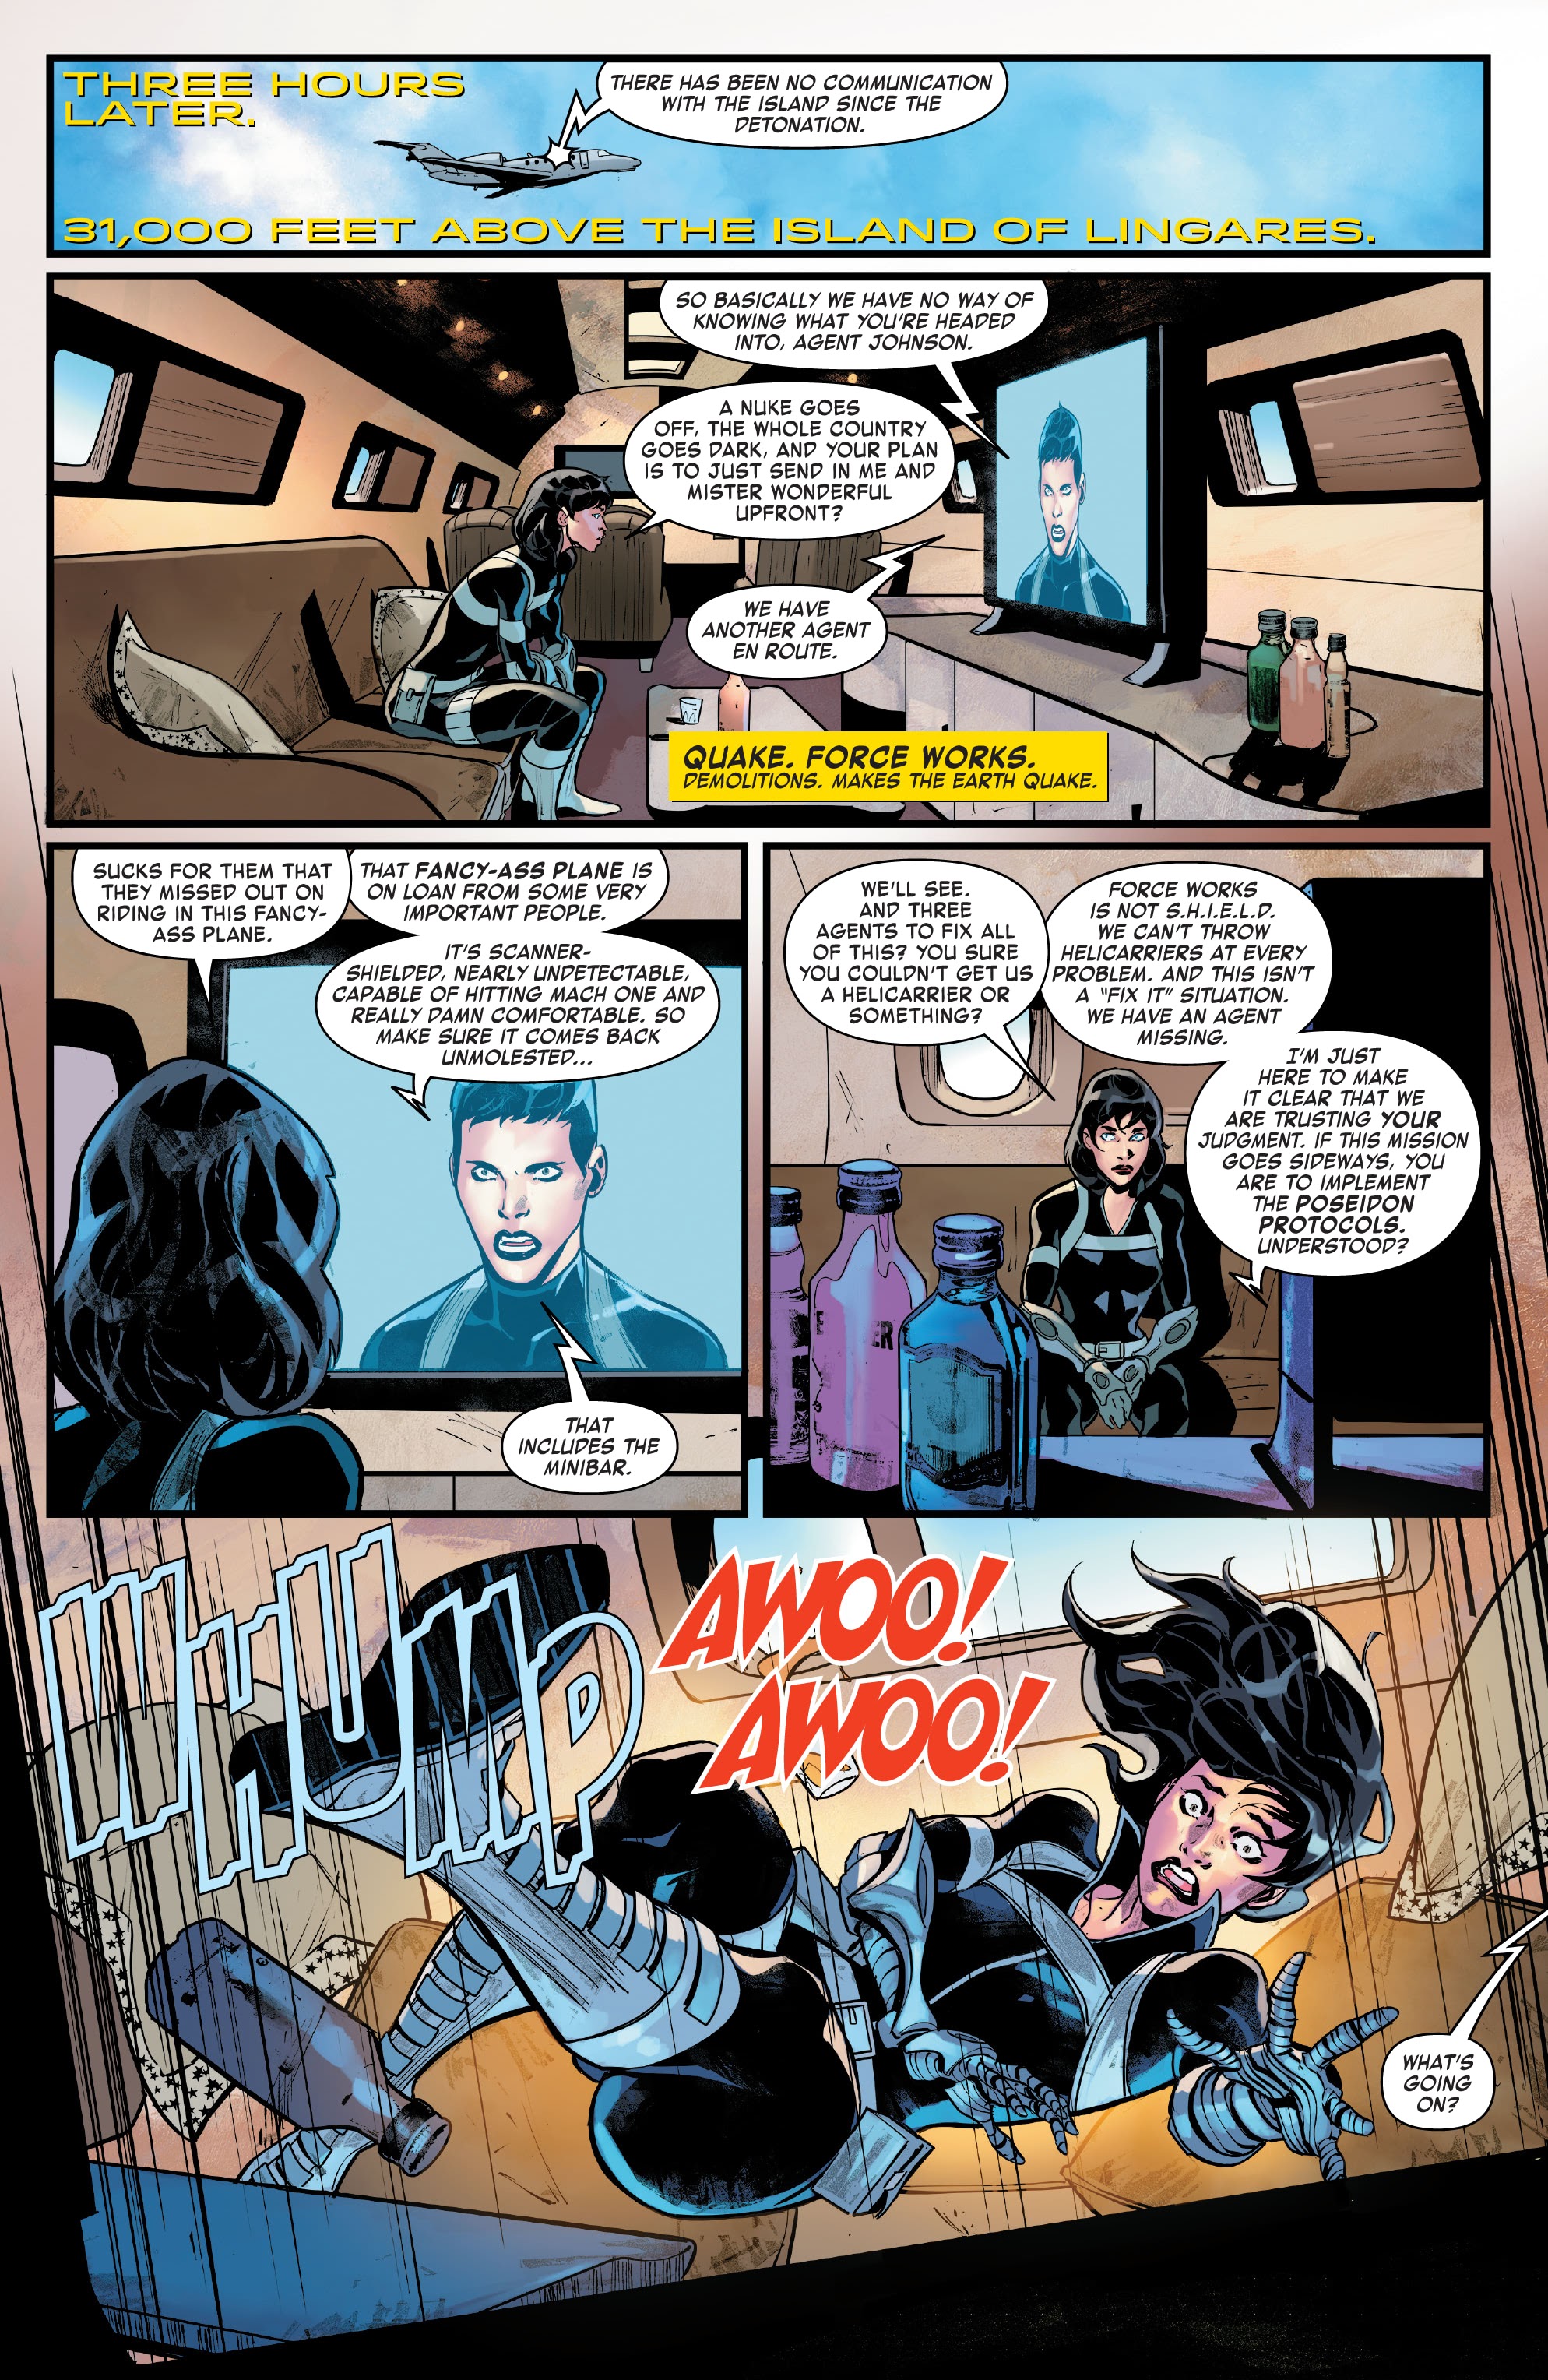 Read online Iron Man 2020: Robot Revolution - Force Works comic -  Issue # TPB (Part 1) - 73